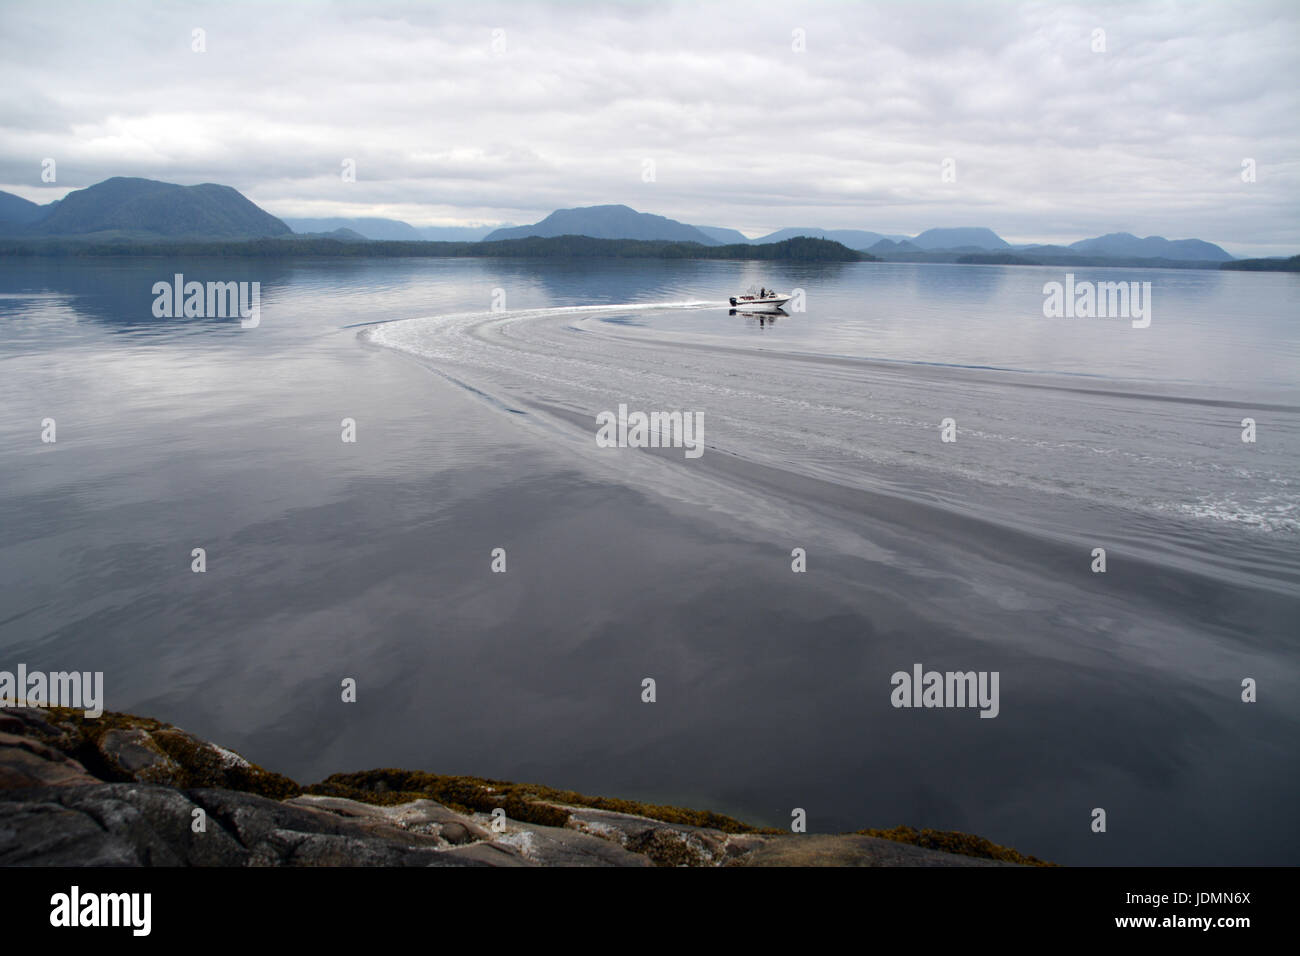 A motorboat cutting through the glassy waters of Spiller Channel in the Great Bear Rainforest, British Columbia, Canada. Stock Photo